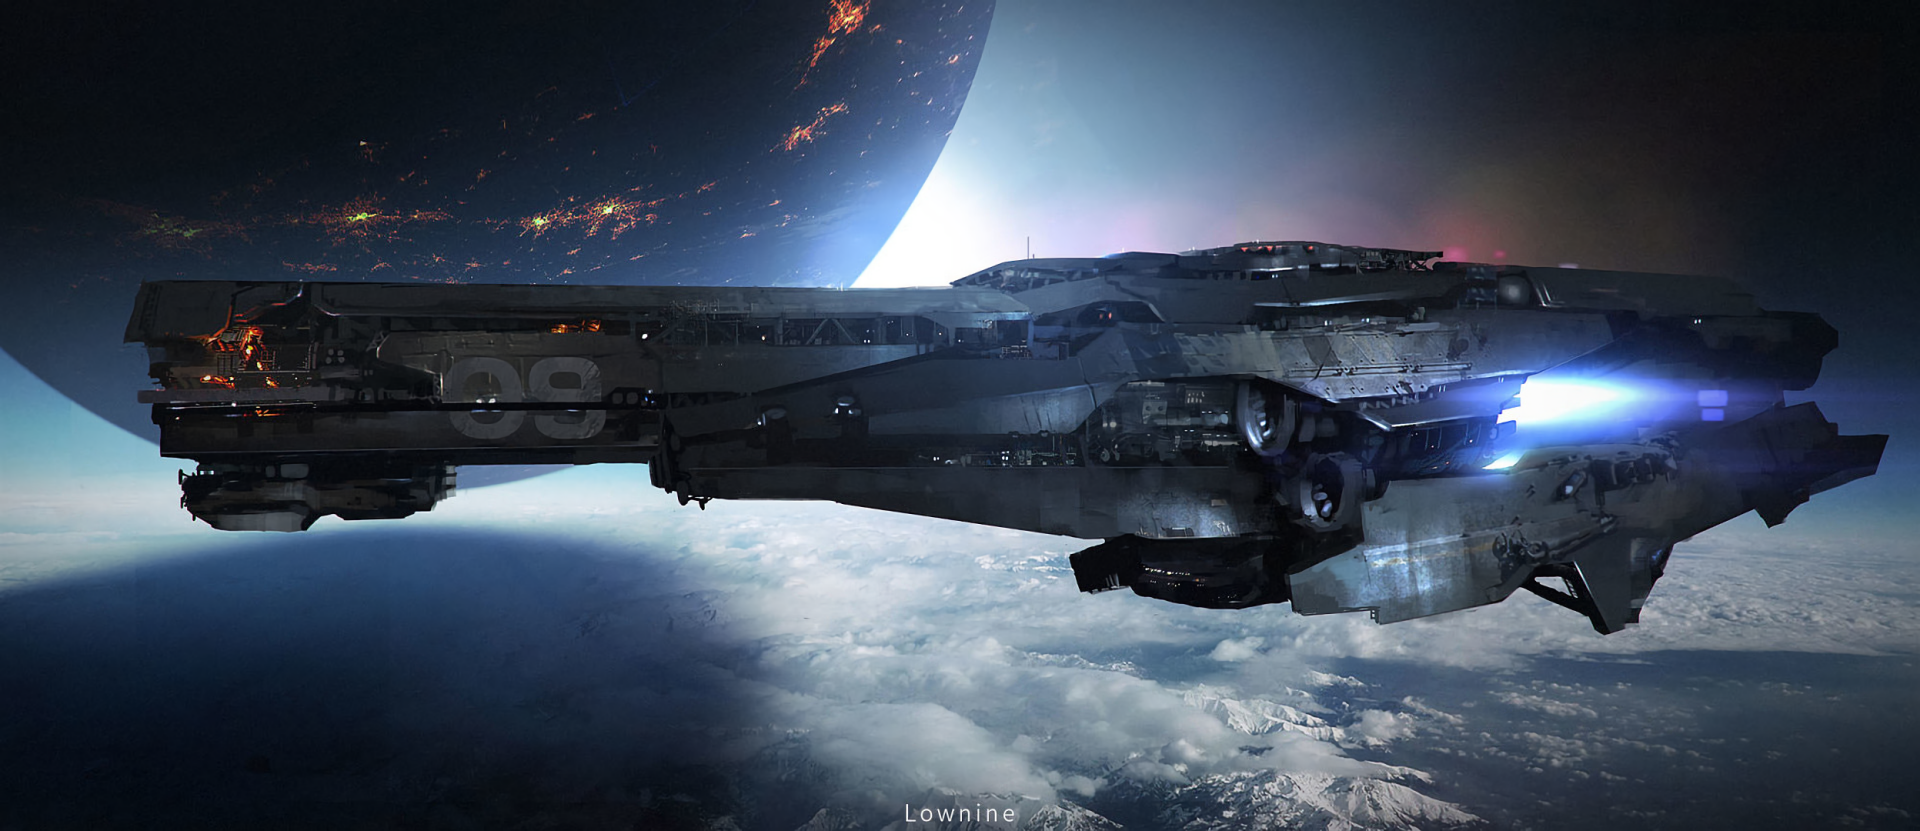 Download Galaxy Planet Aircraft Sci Fi Spaceship HD Wallpaper by Lownine